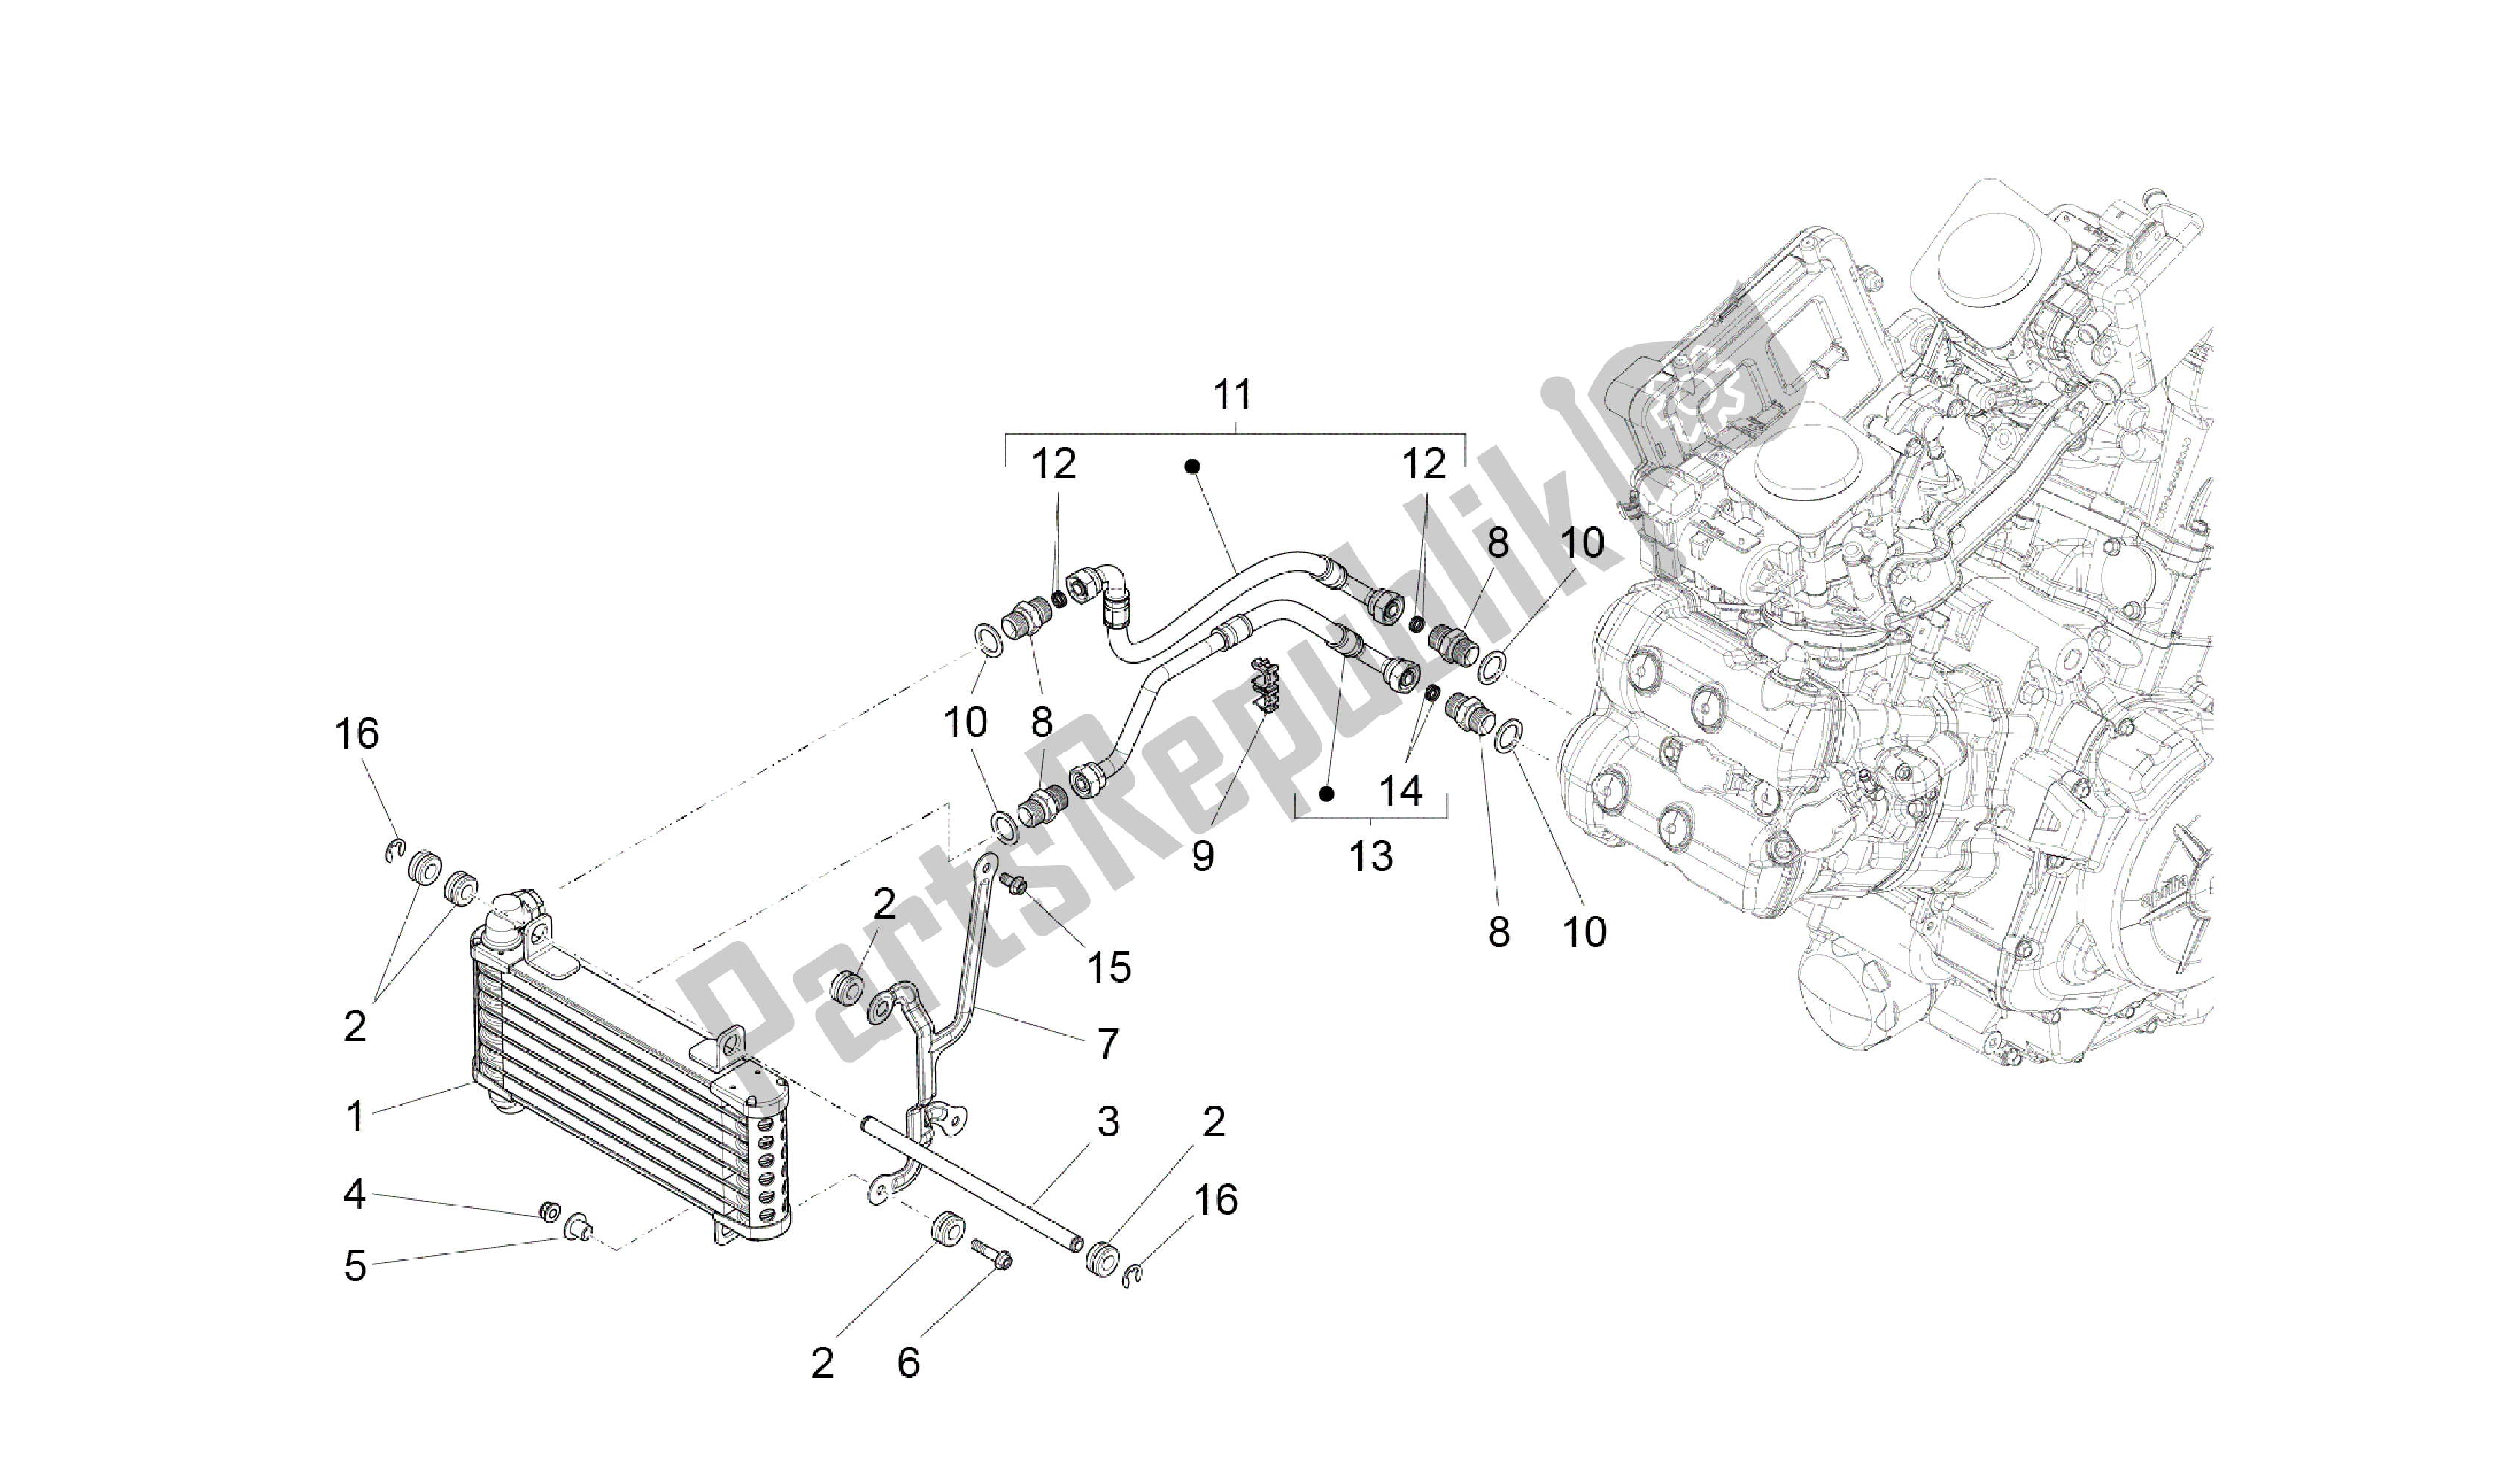 All parts for the Oil Radiator of the Aprilia Caponord 1200 2013 - 2015